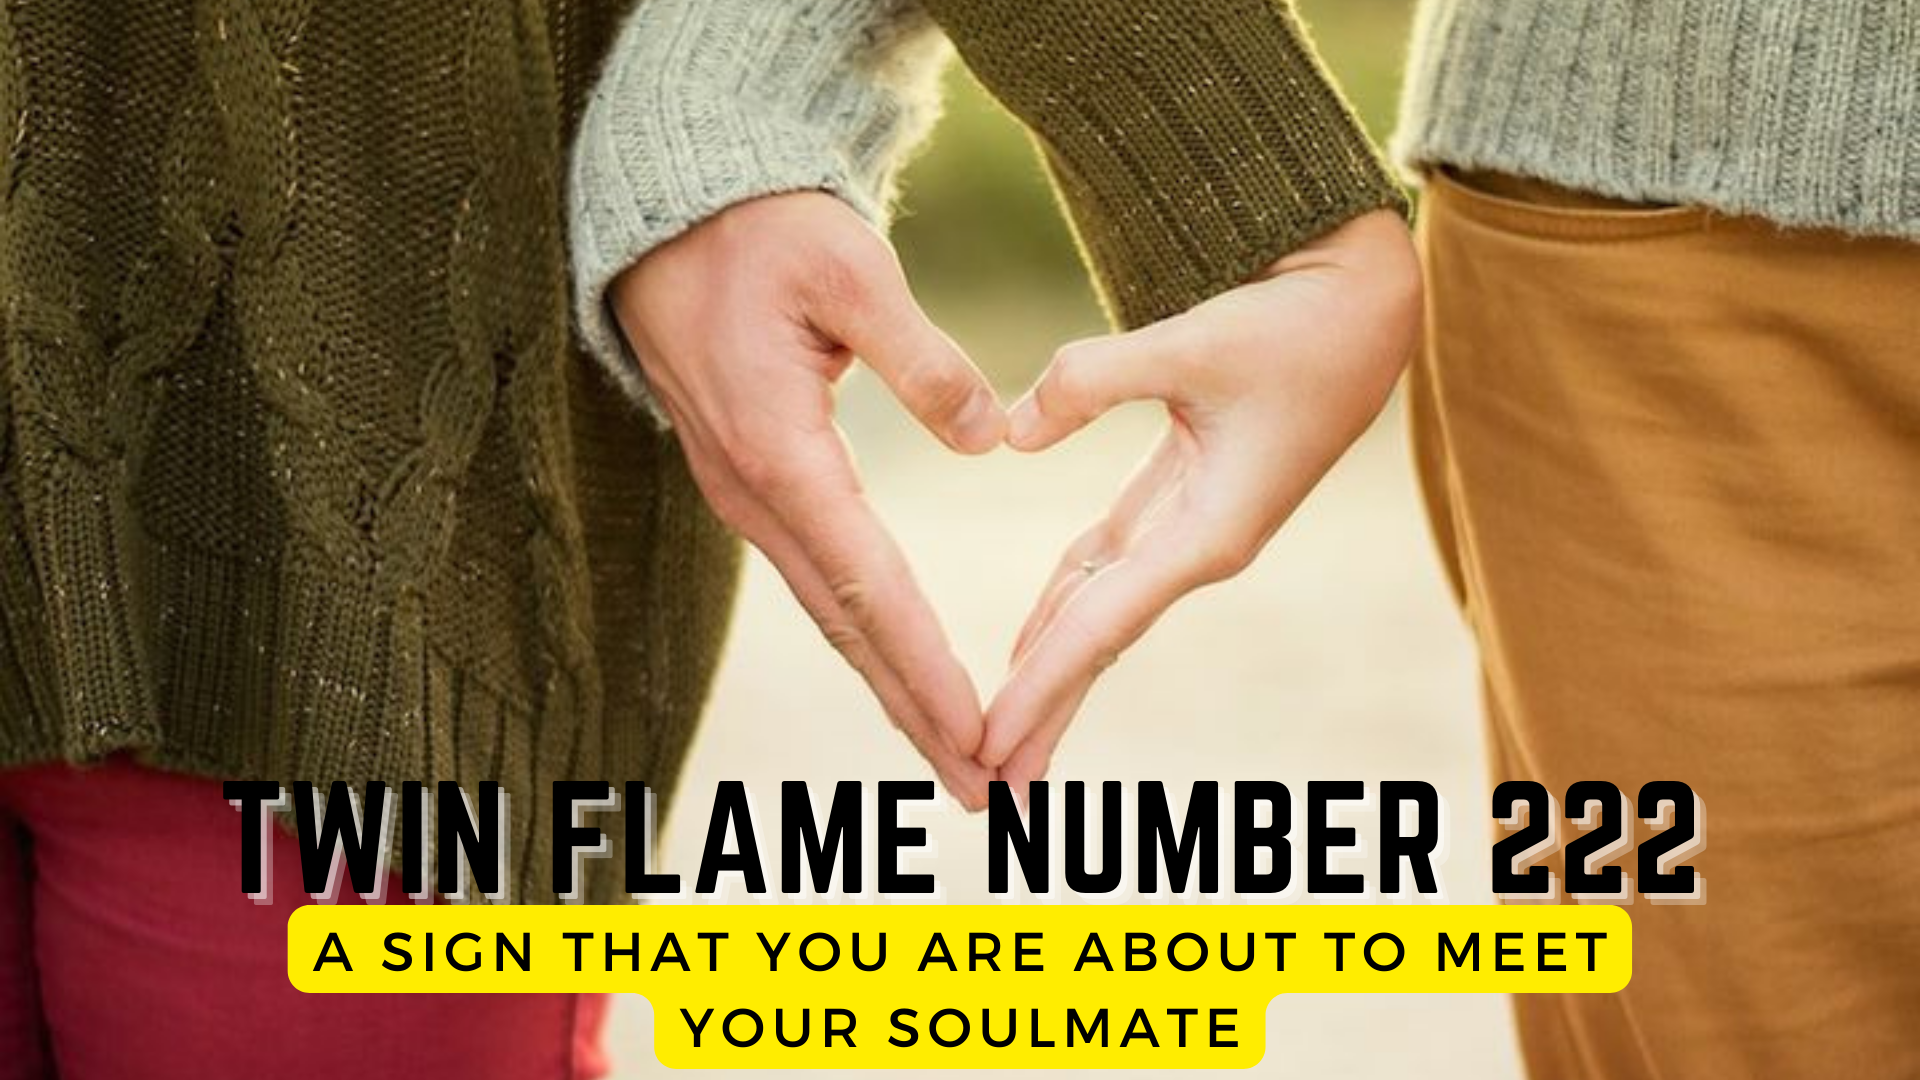 Twin Flame Number 222 - You Are About To Meet Your Soulmate